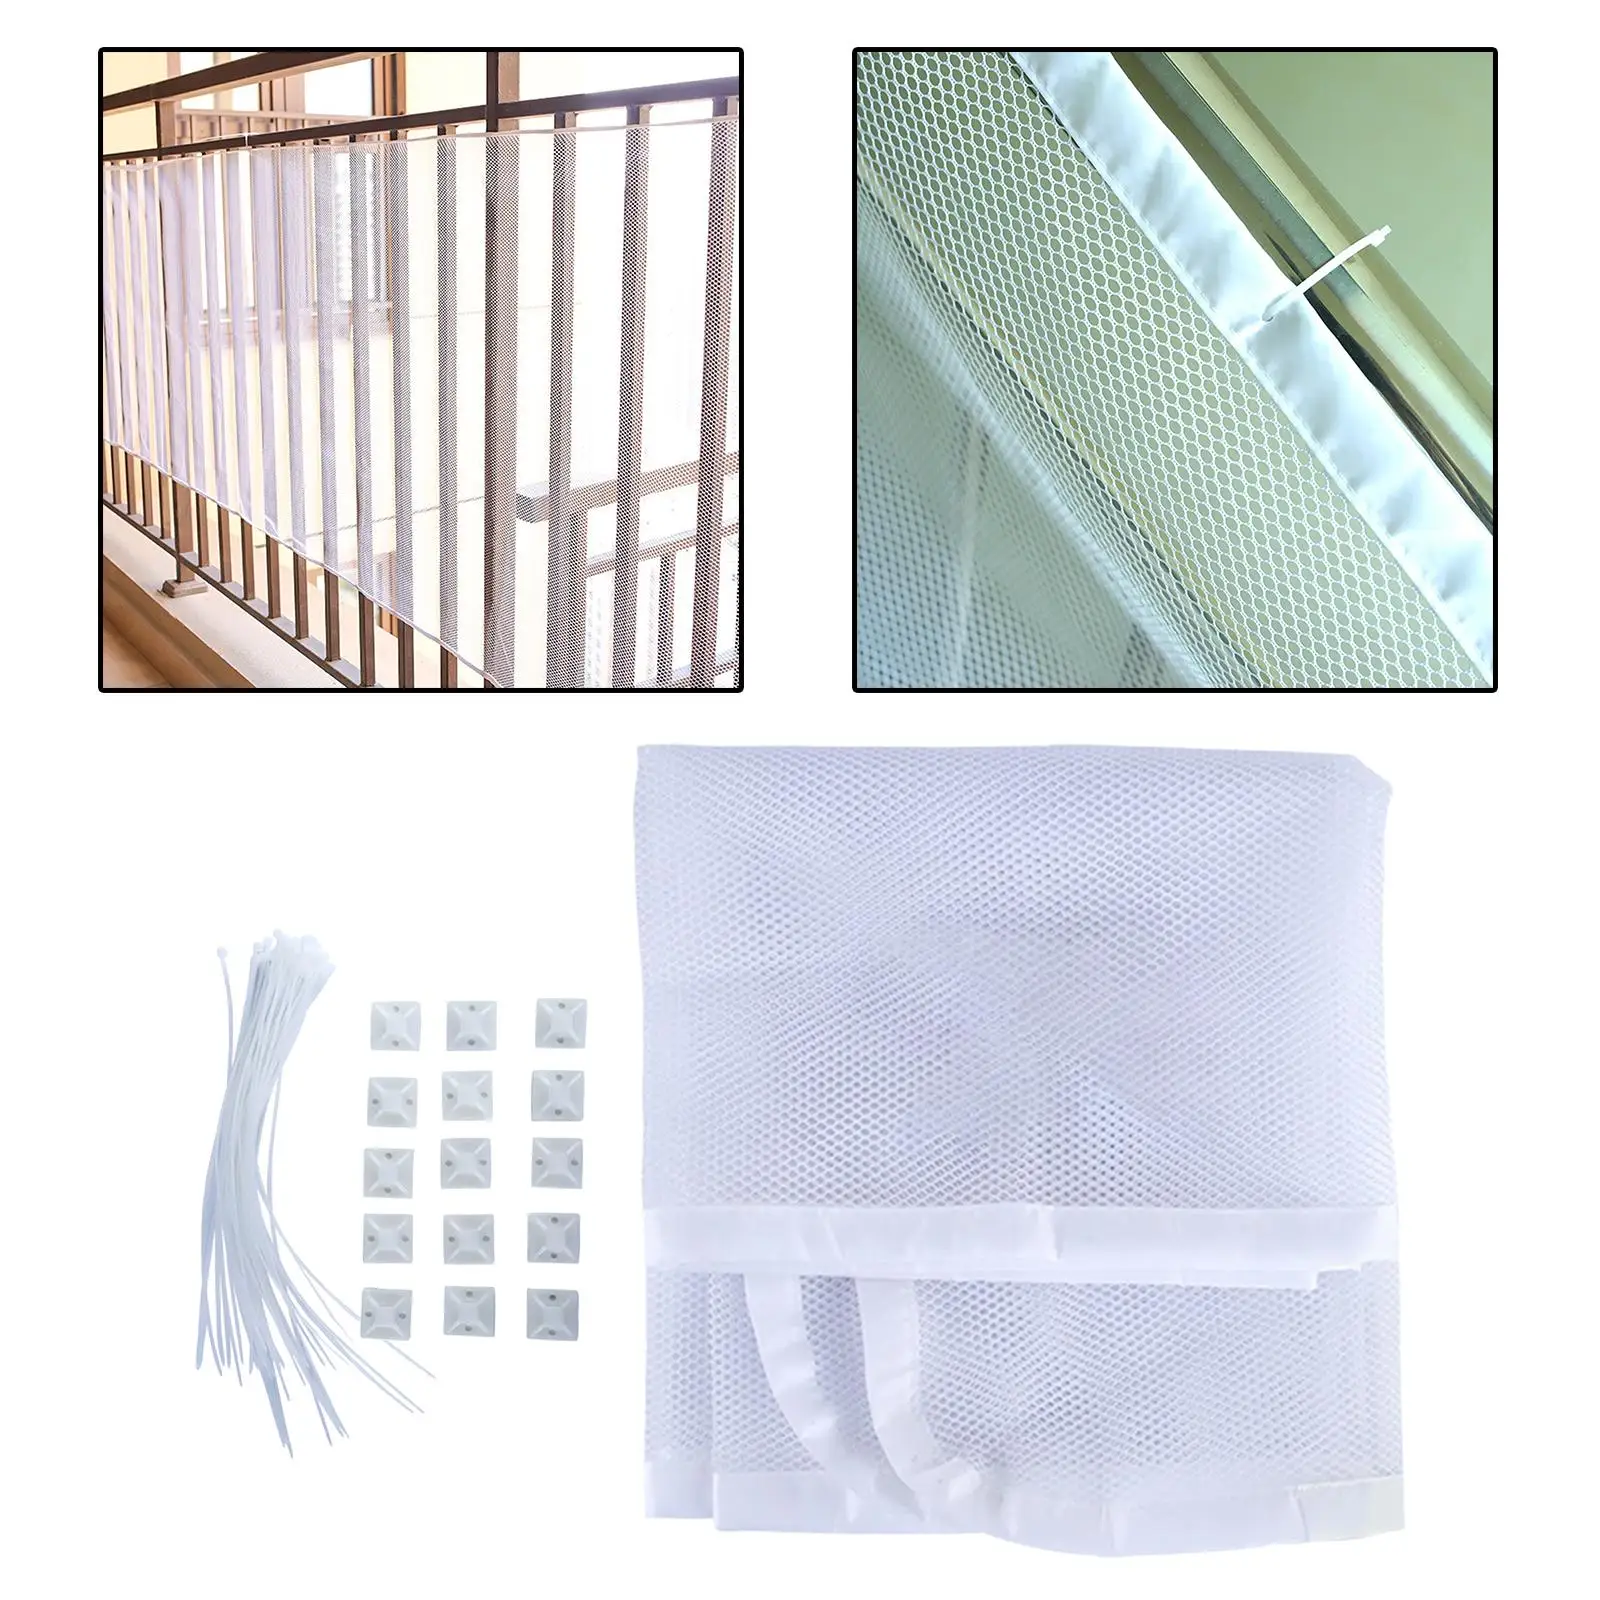 Children Safety Net Baby Fall Protect Safety Netting Durable Balcony Patio Stair Railing Safety Net for Kids Pet Toy